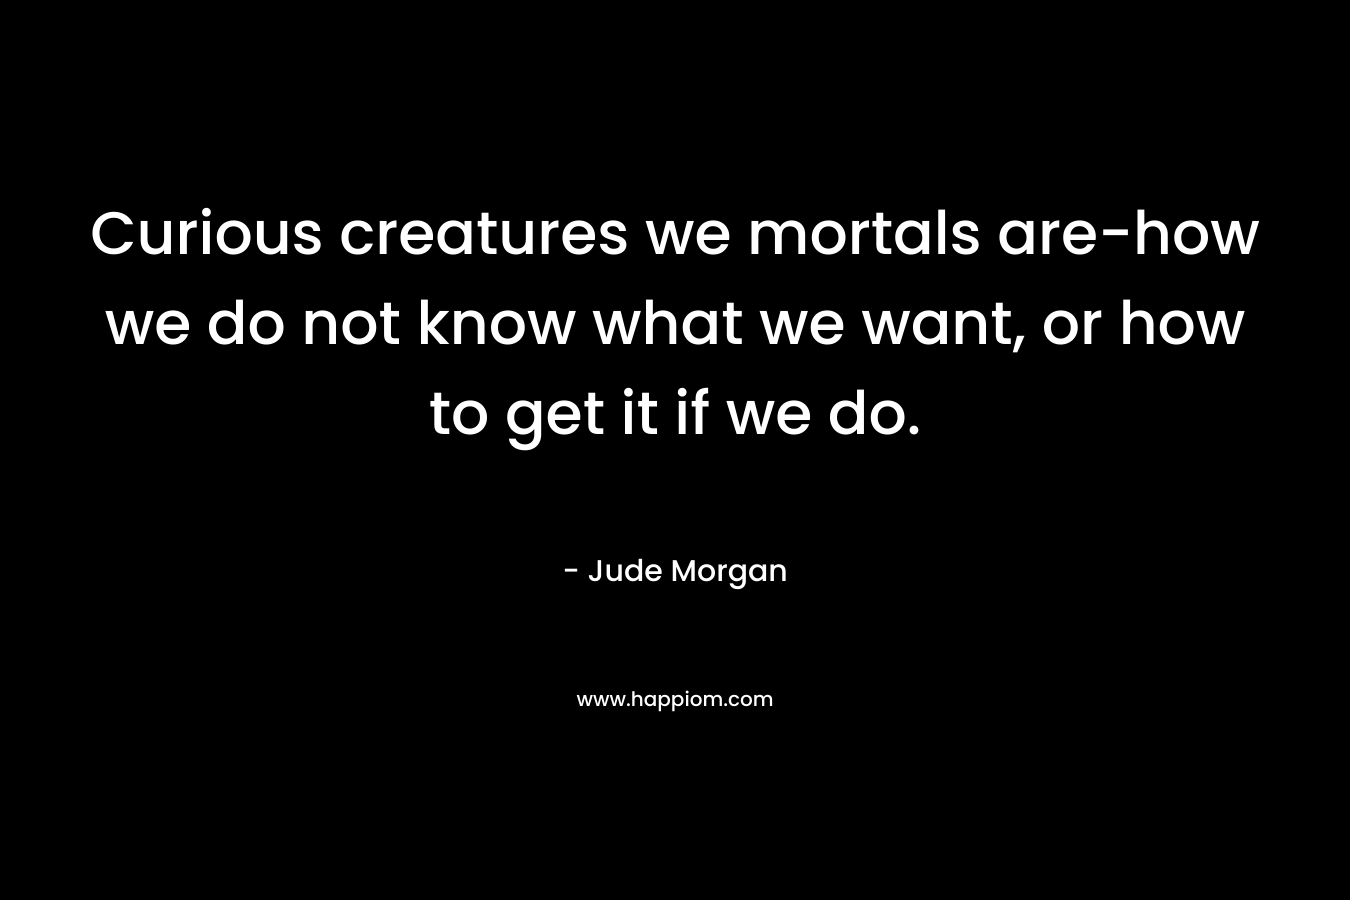 Curious creatures we mortals are-how we do not know what we want, or how to get it if we do.